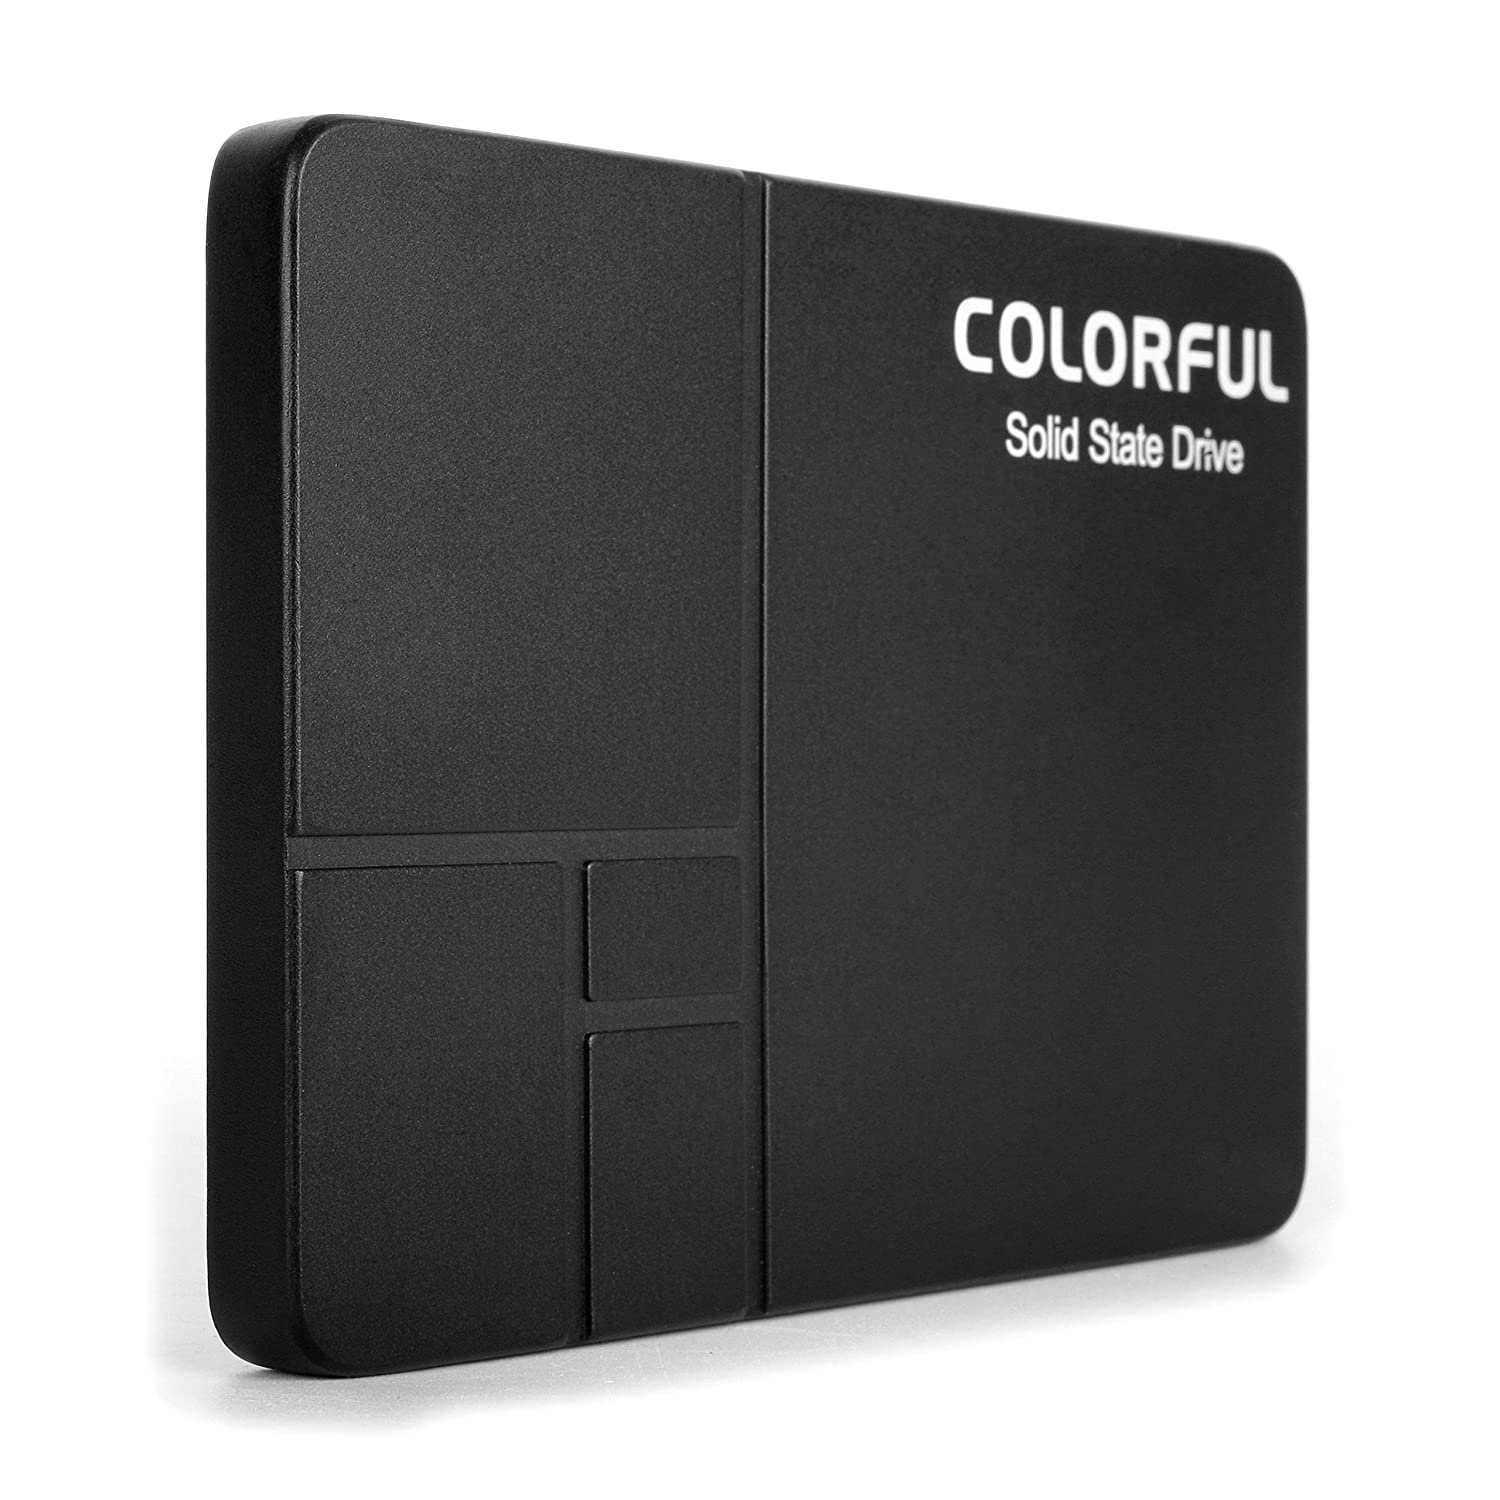 Colorful SSD 500GB Plus Series- 3D Nand SATA 3 Solid State Drive